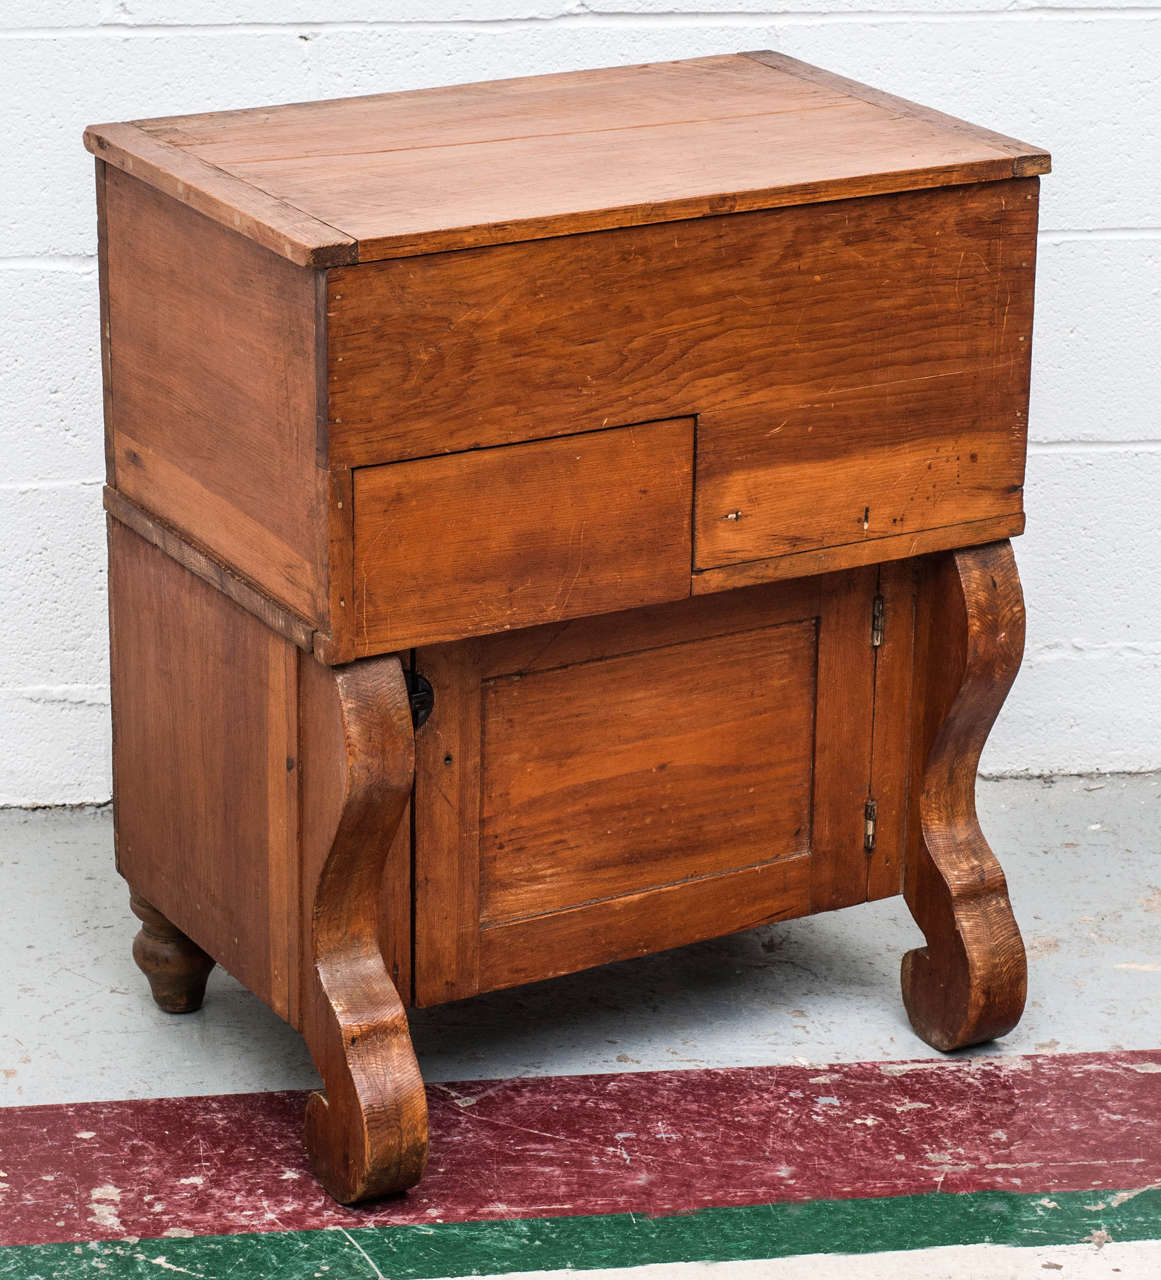 A most unusual small dry sink with lifting top and single drawer to the front, mounted on a single door base with Empire style front legs. Entirely original. Probably from Maine.